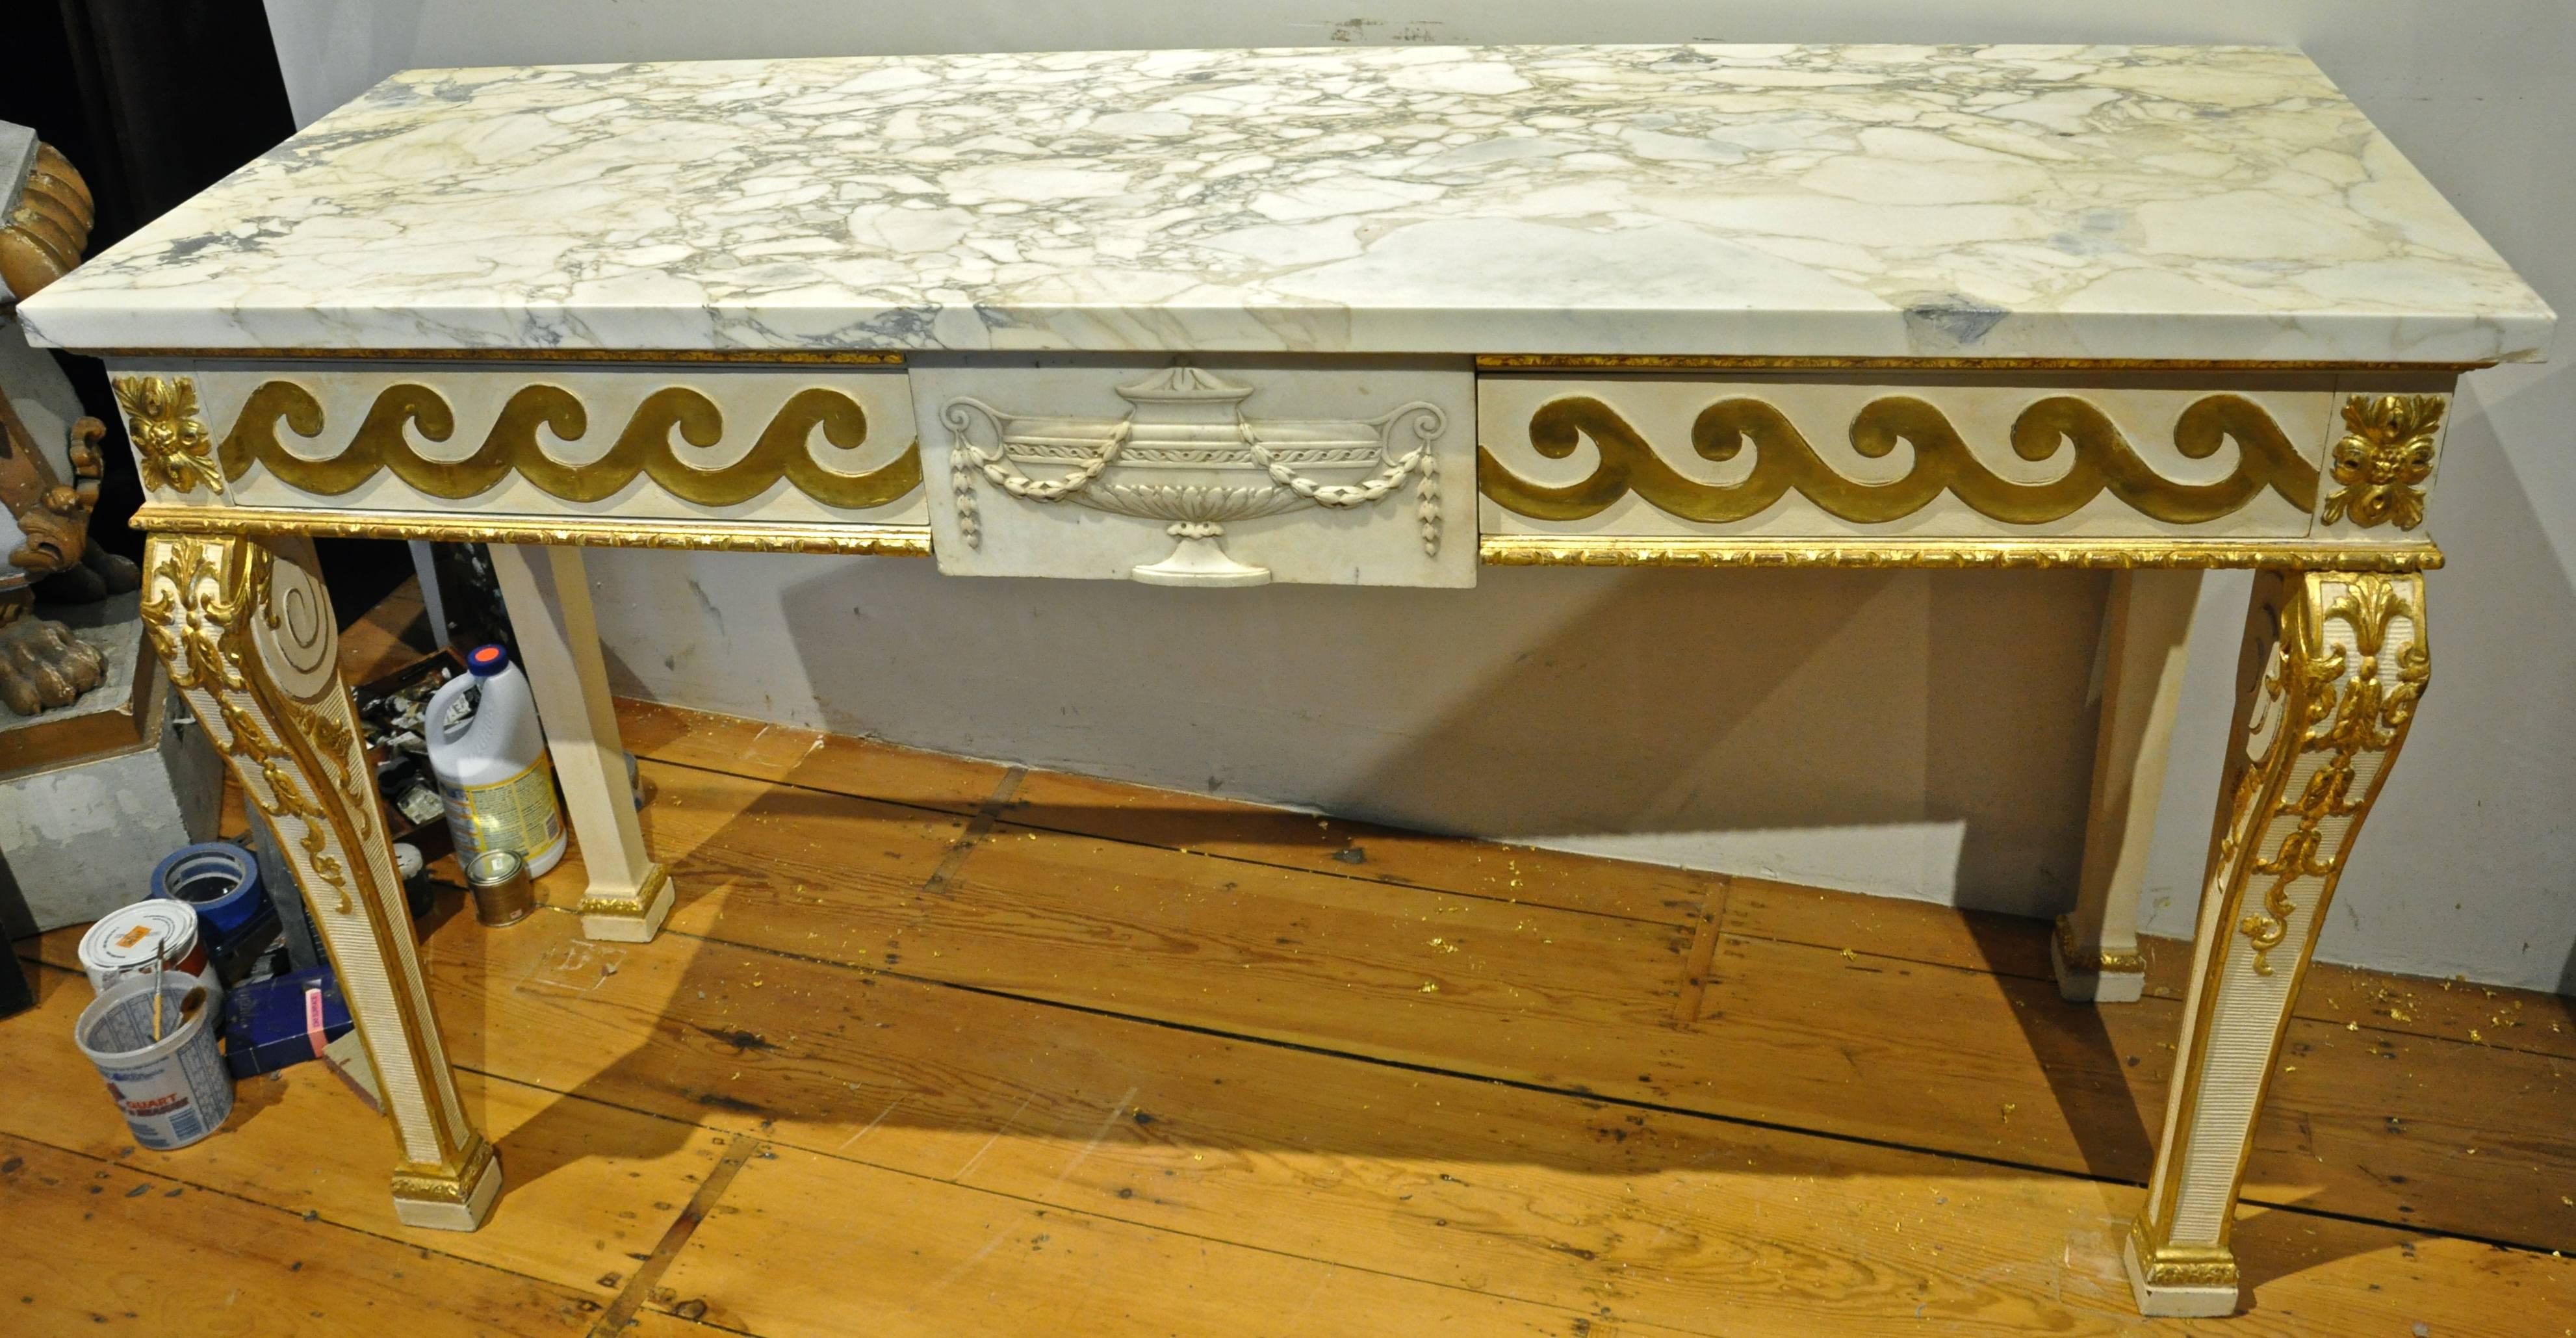 Late 19th century Irish parcel-gilt console table in style of William Kent

marble top.
Carved giltwood and painted elements.
Running dog detail to reveal two drawers flanking a central carved marble plaque of a neoclassical urn,
early 18th